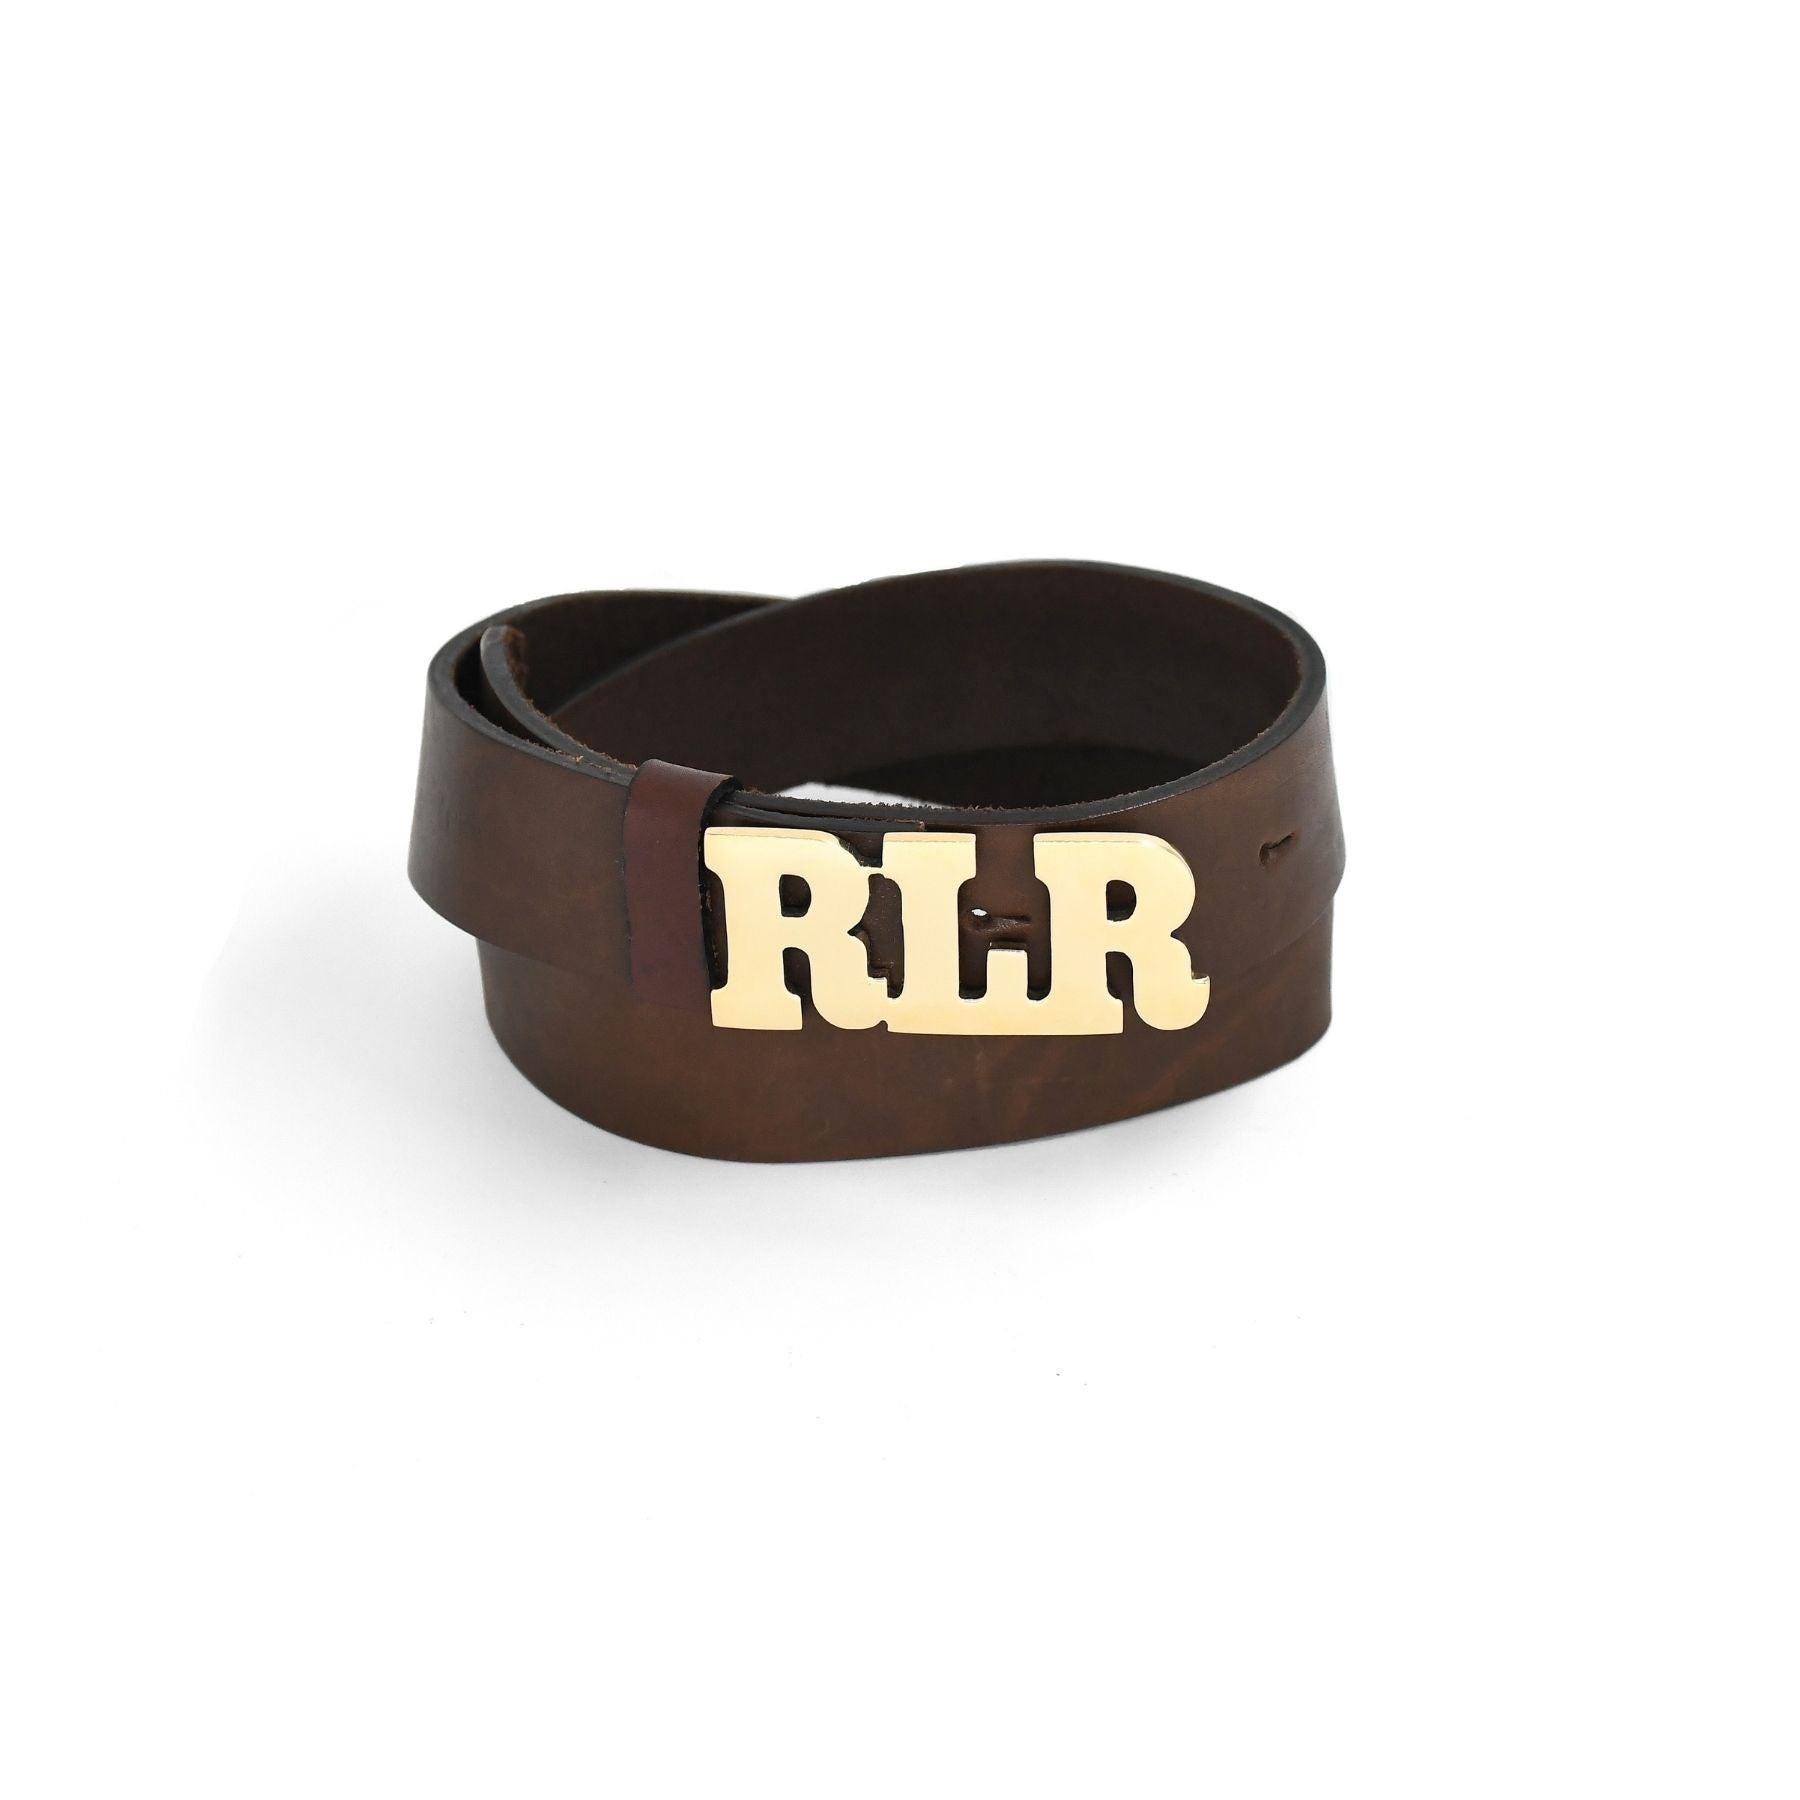 Gaucholife Belts Personalized Leather Buckle Belt